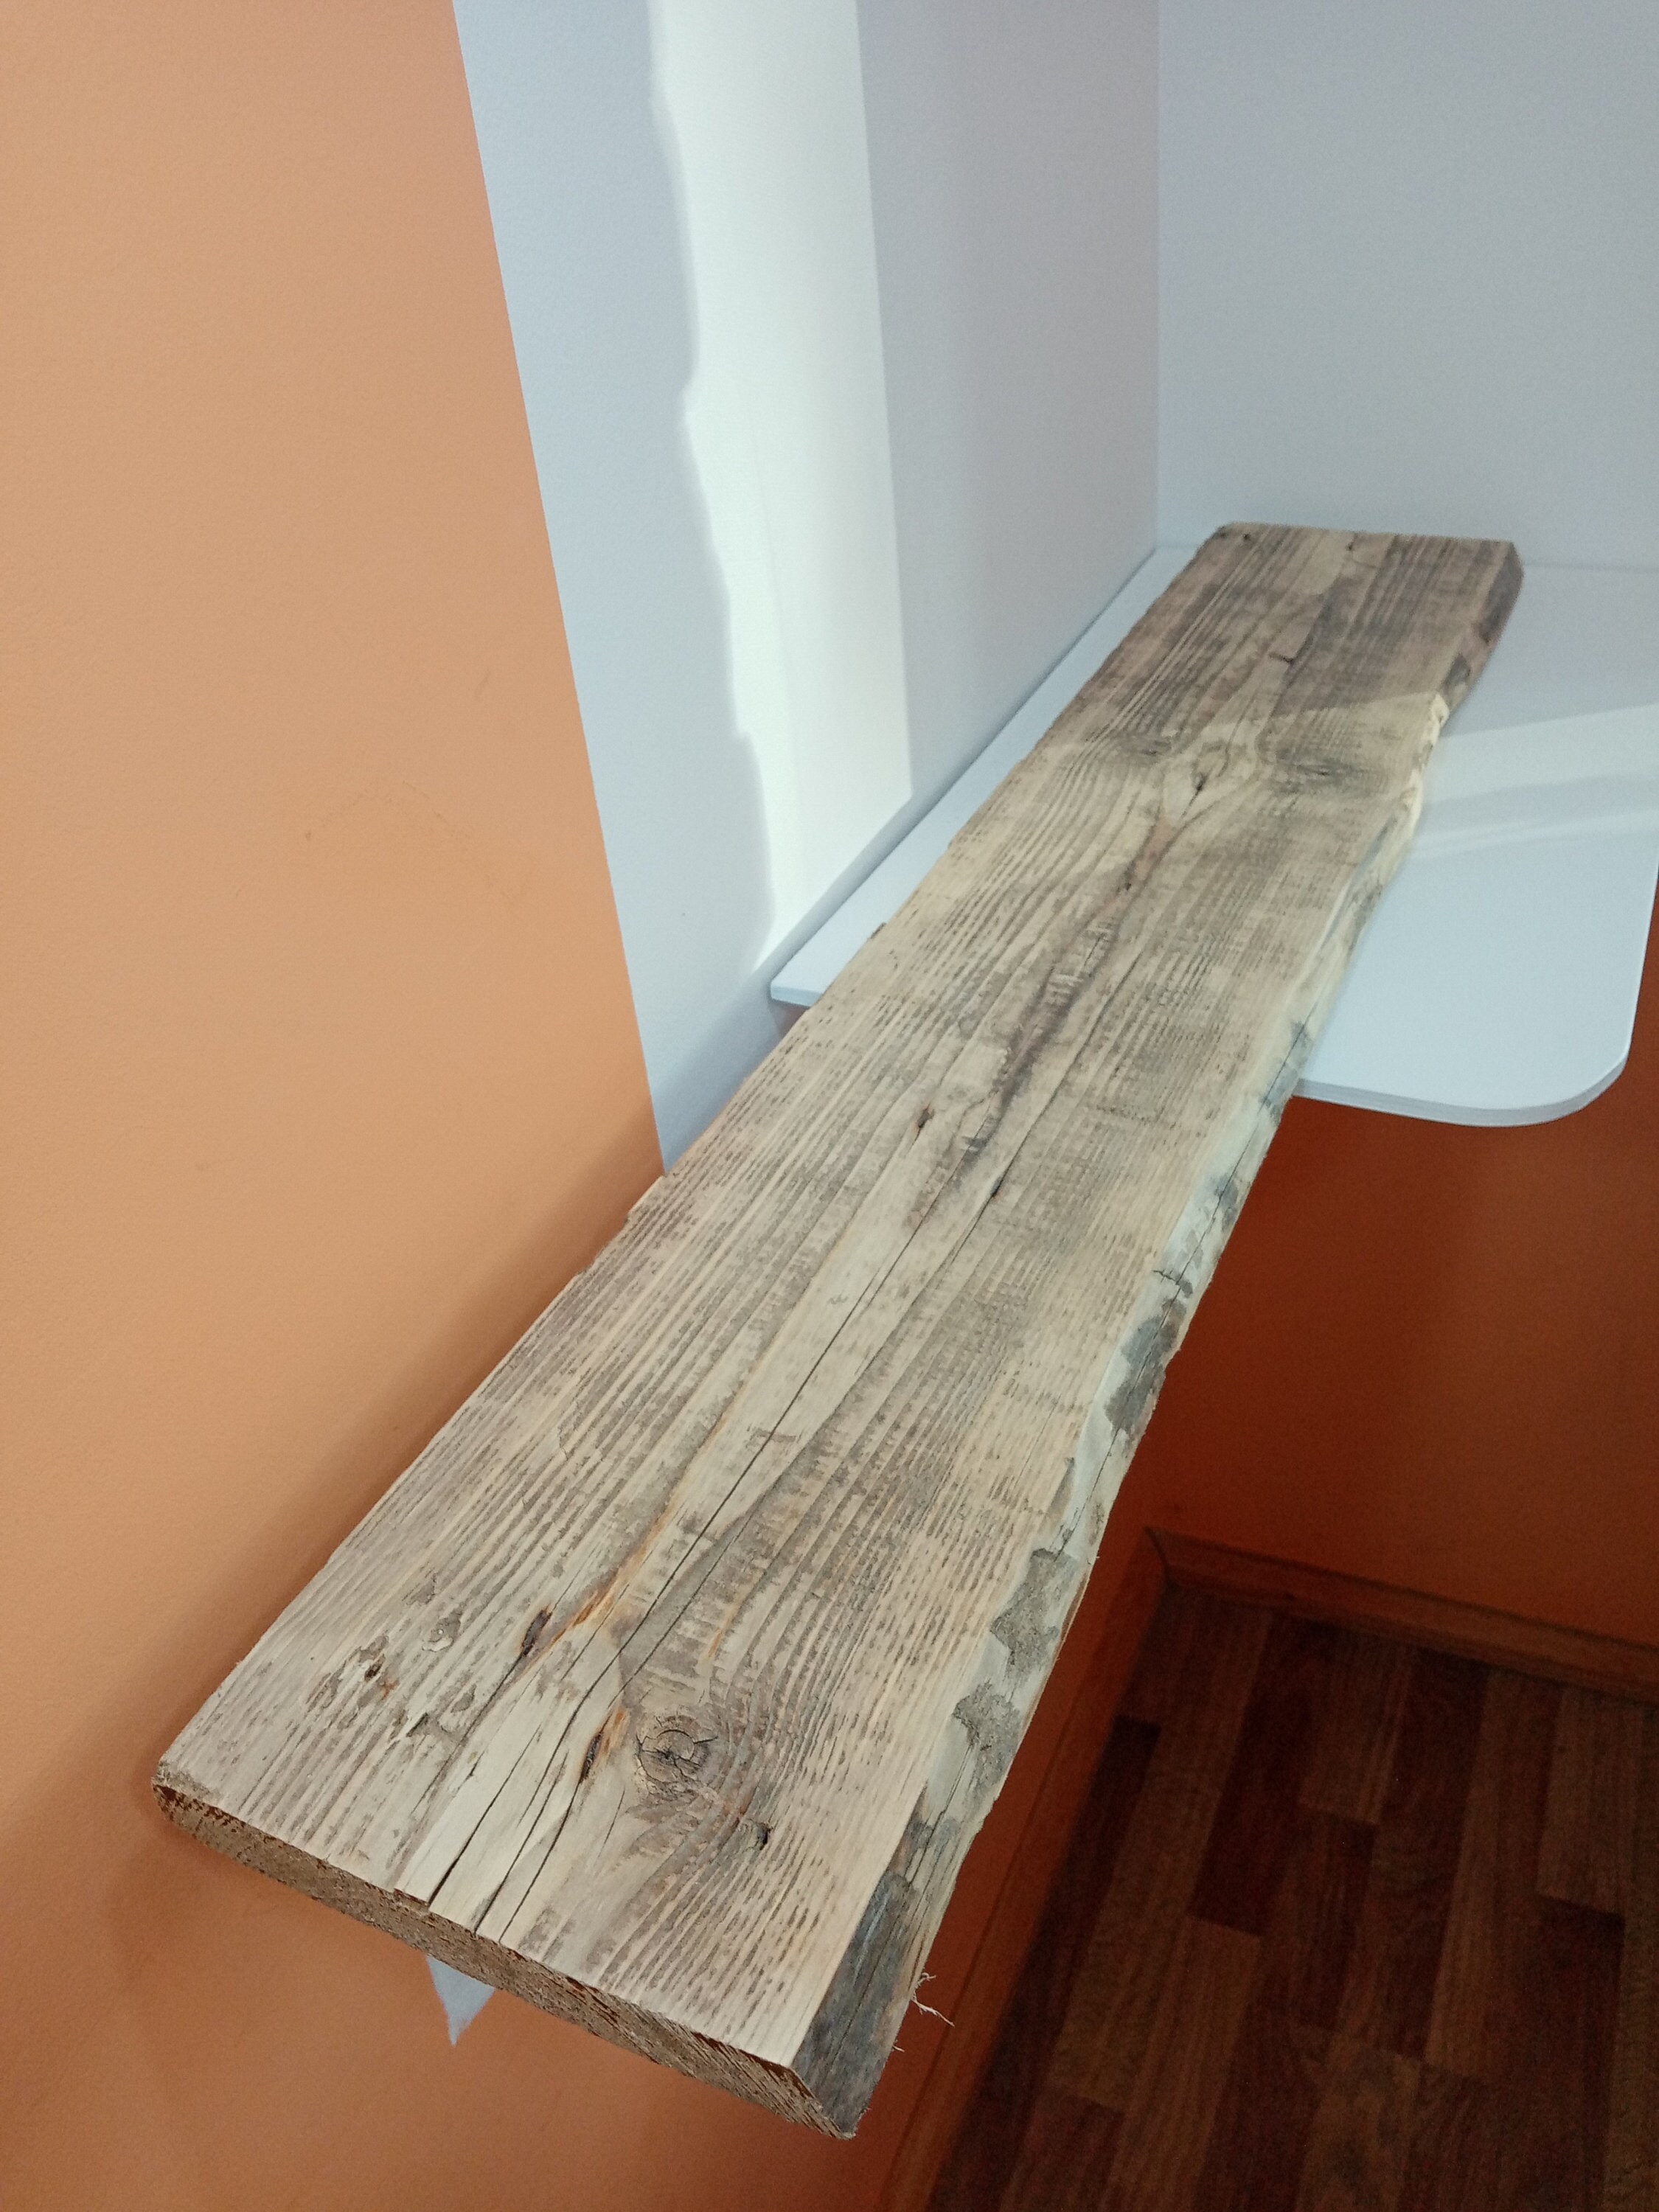 Set of 3 Rustic Wooden Planks, Reclaimed Wood, Raw Wood With Bark, Wooden  Board, Wood Diy Project, Wooden Material, Wood Plank With Bark 